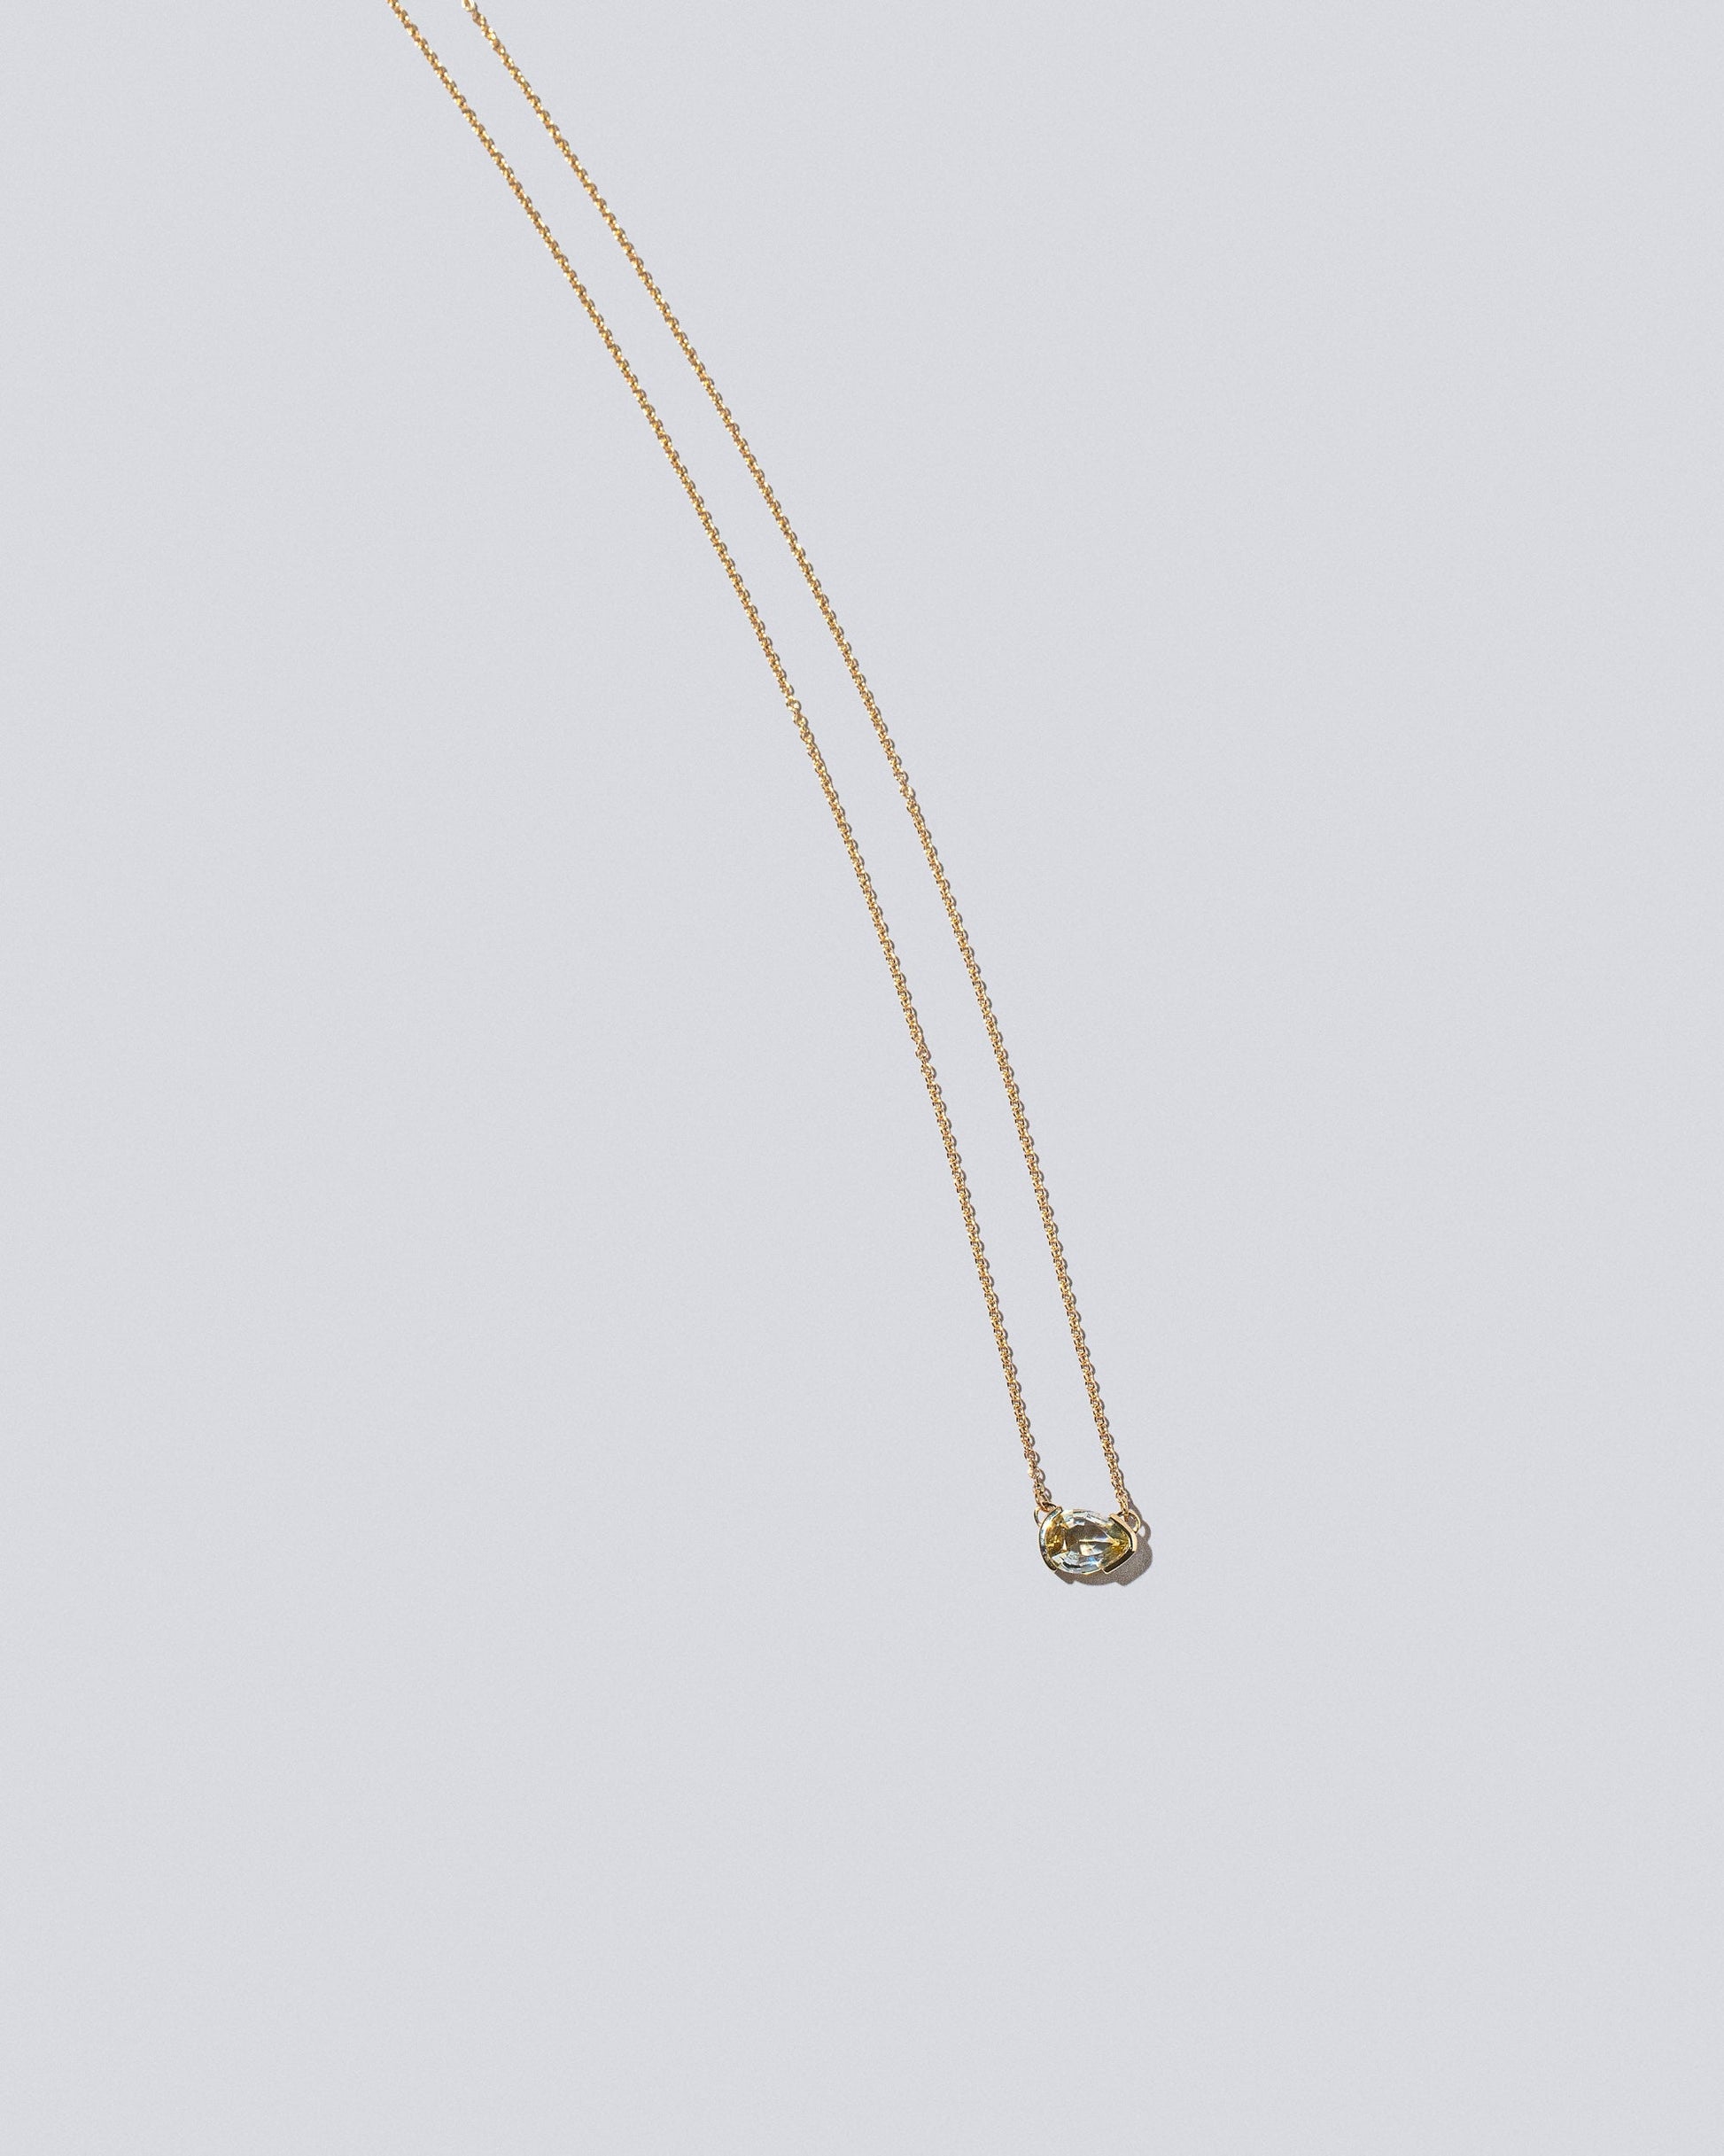 Product photo of the Guppy Necklace on light color background